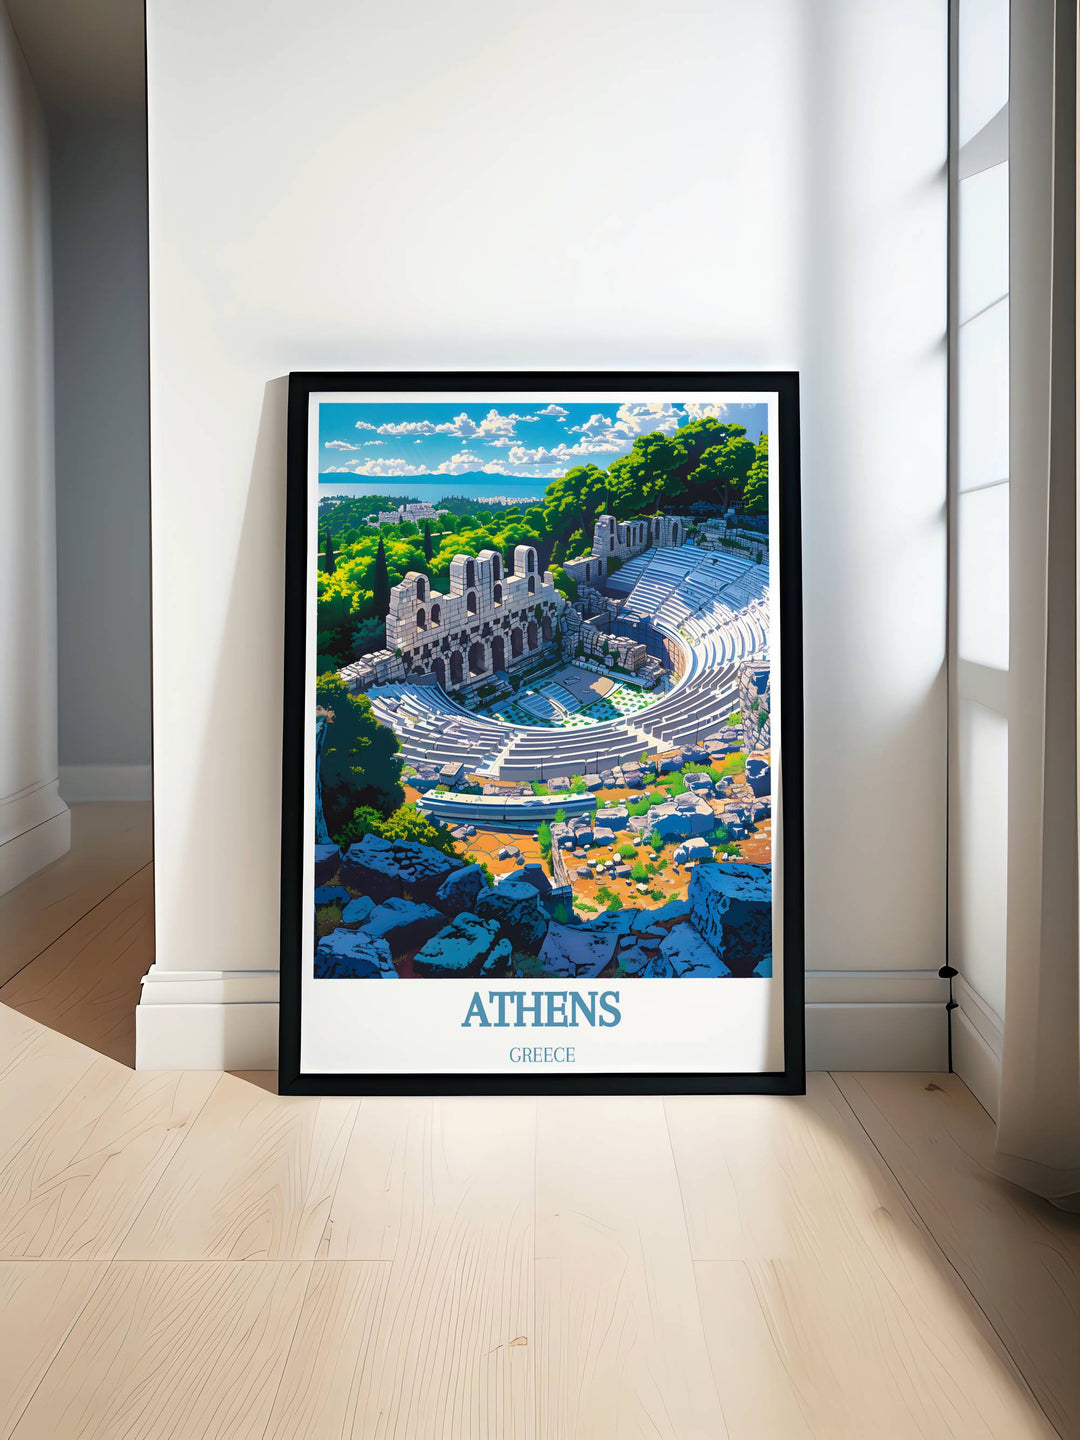 Theatre of Dionysus art print capturing the ancient seats and stage where Greek drama was born, nestled under the Athenian sky.